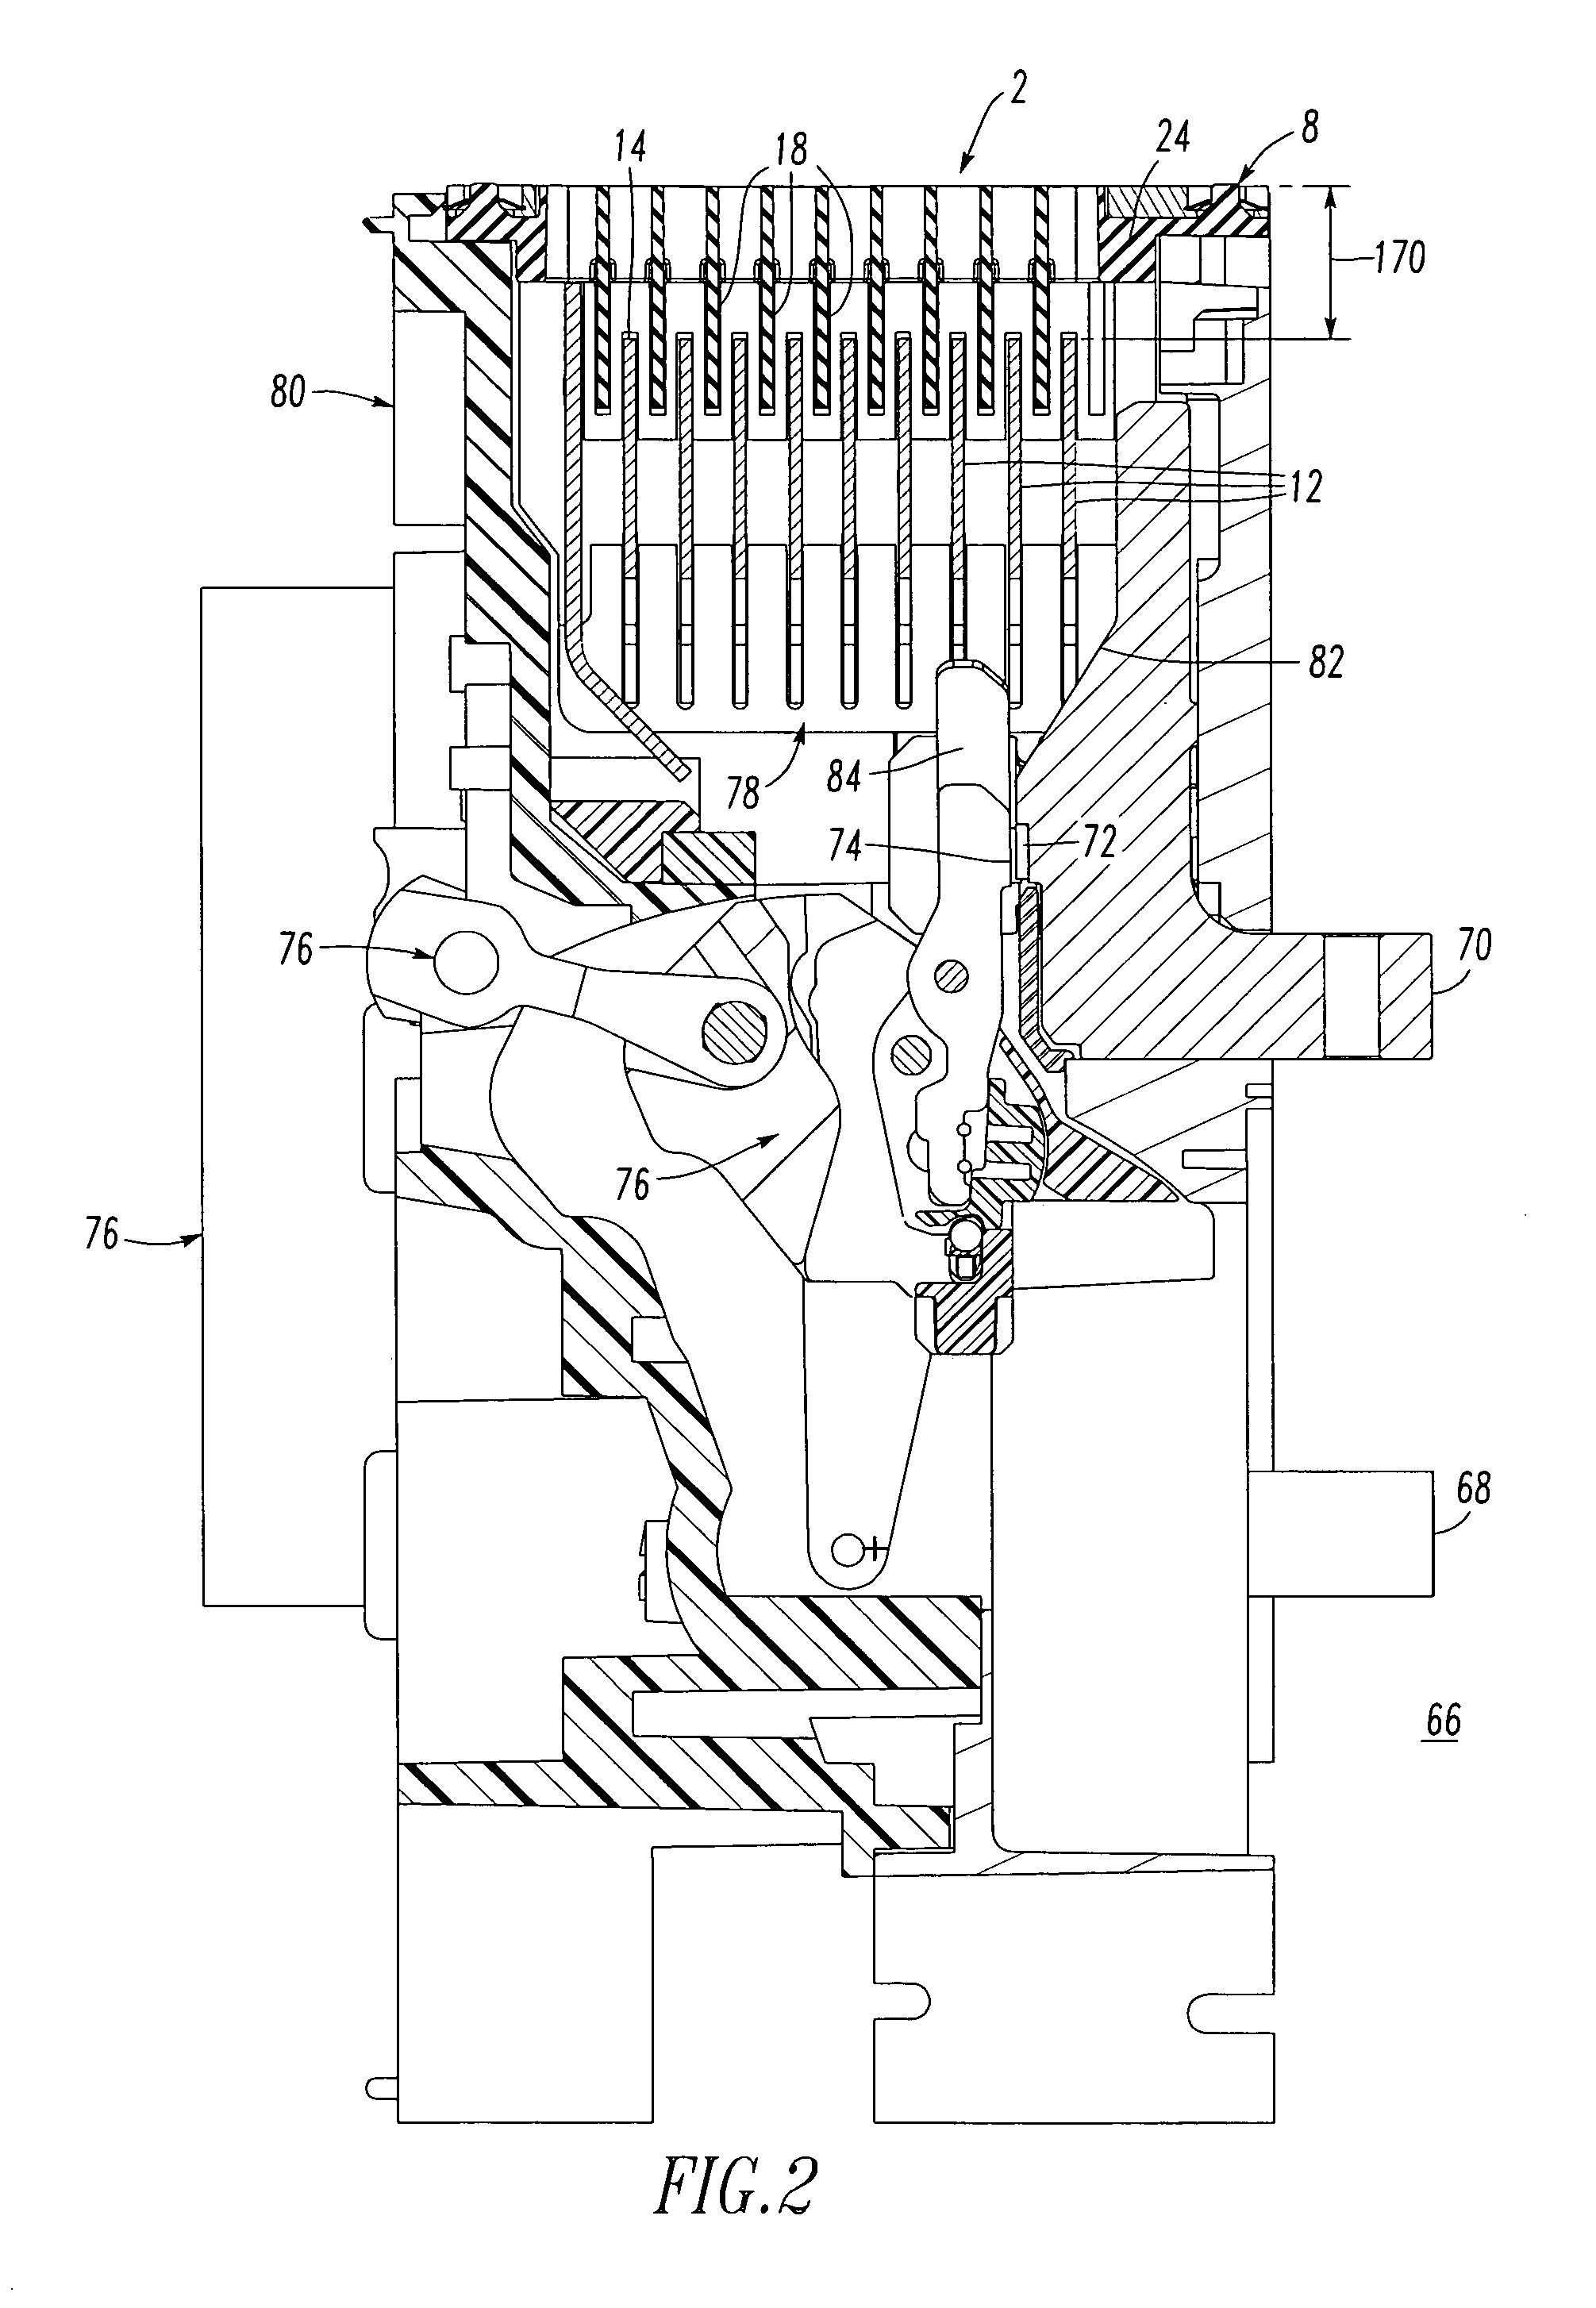 Arc chute and circuit interrupter employing the same